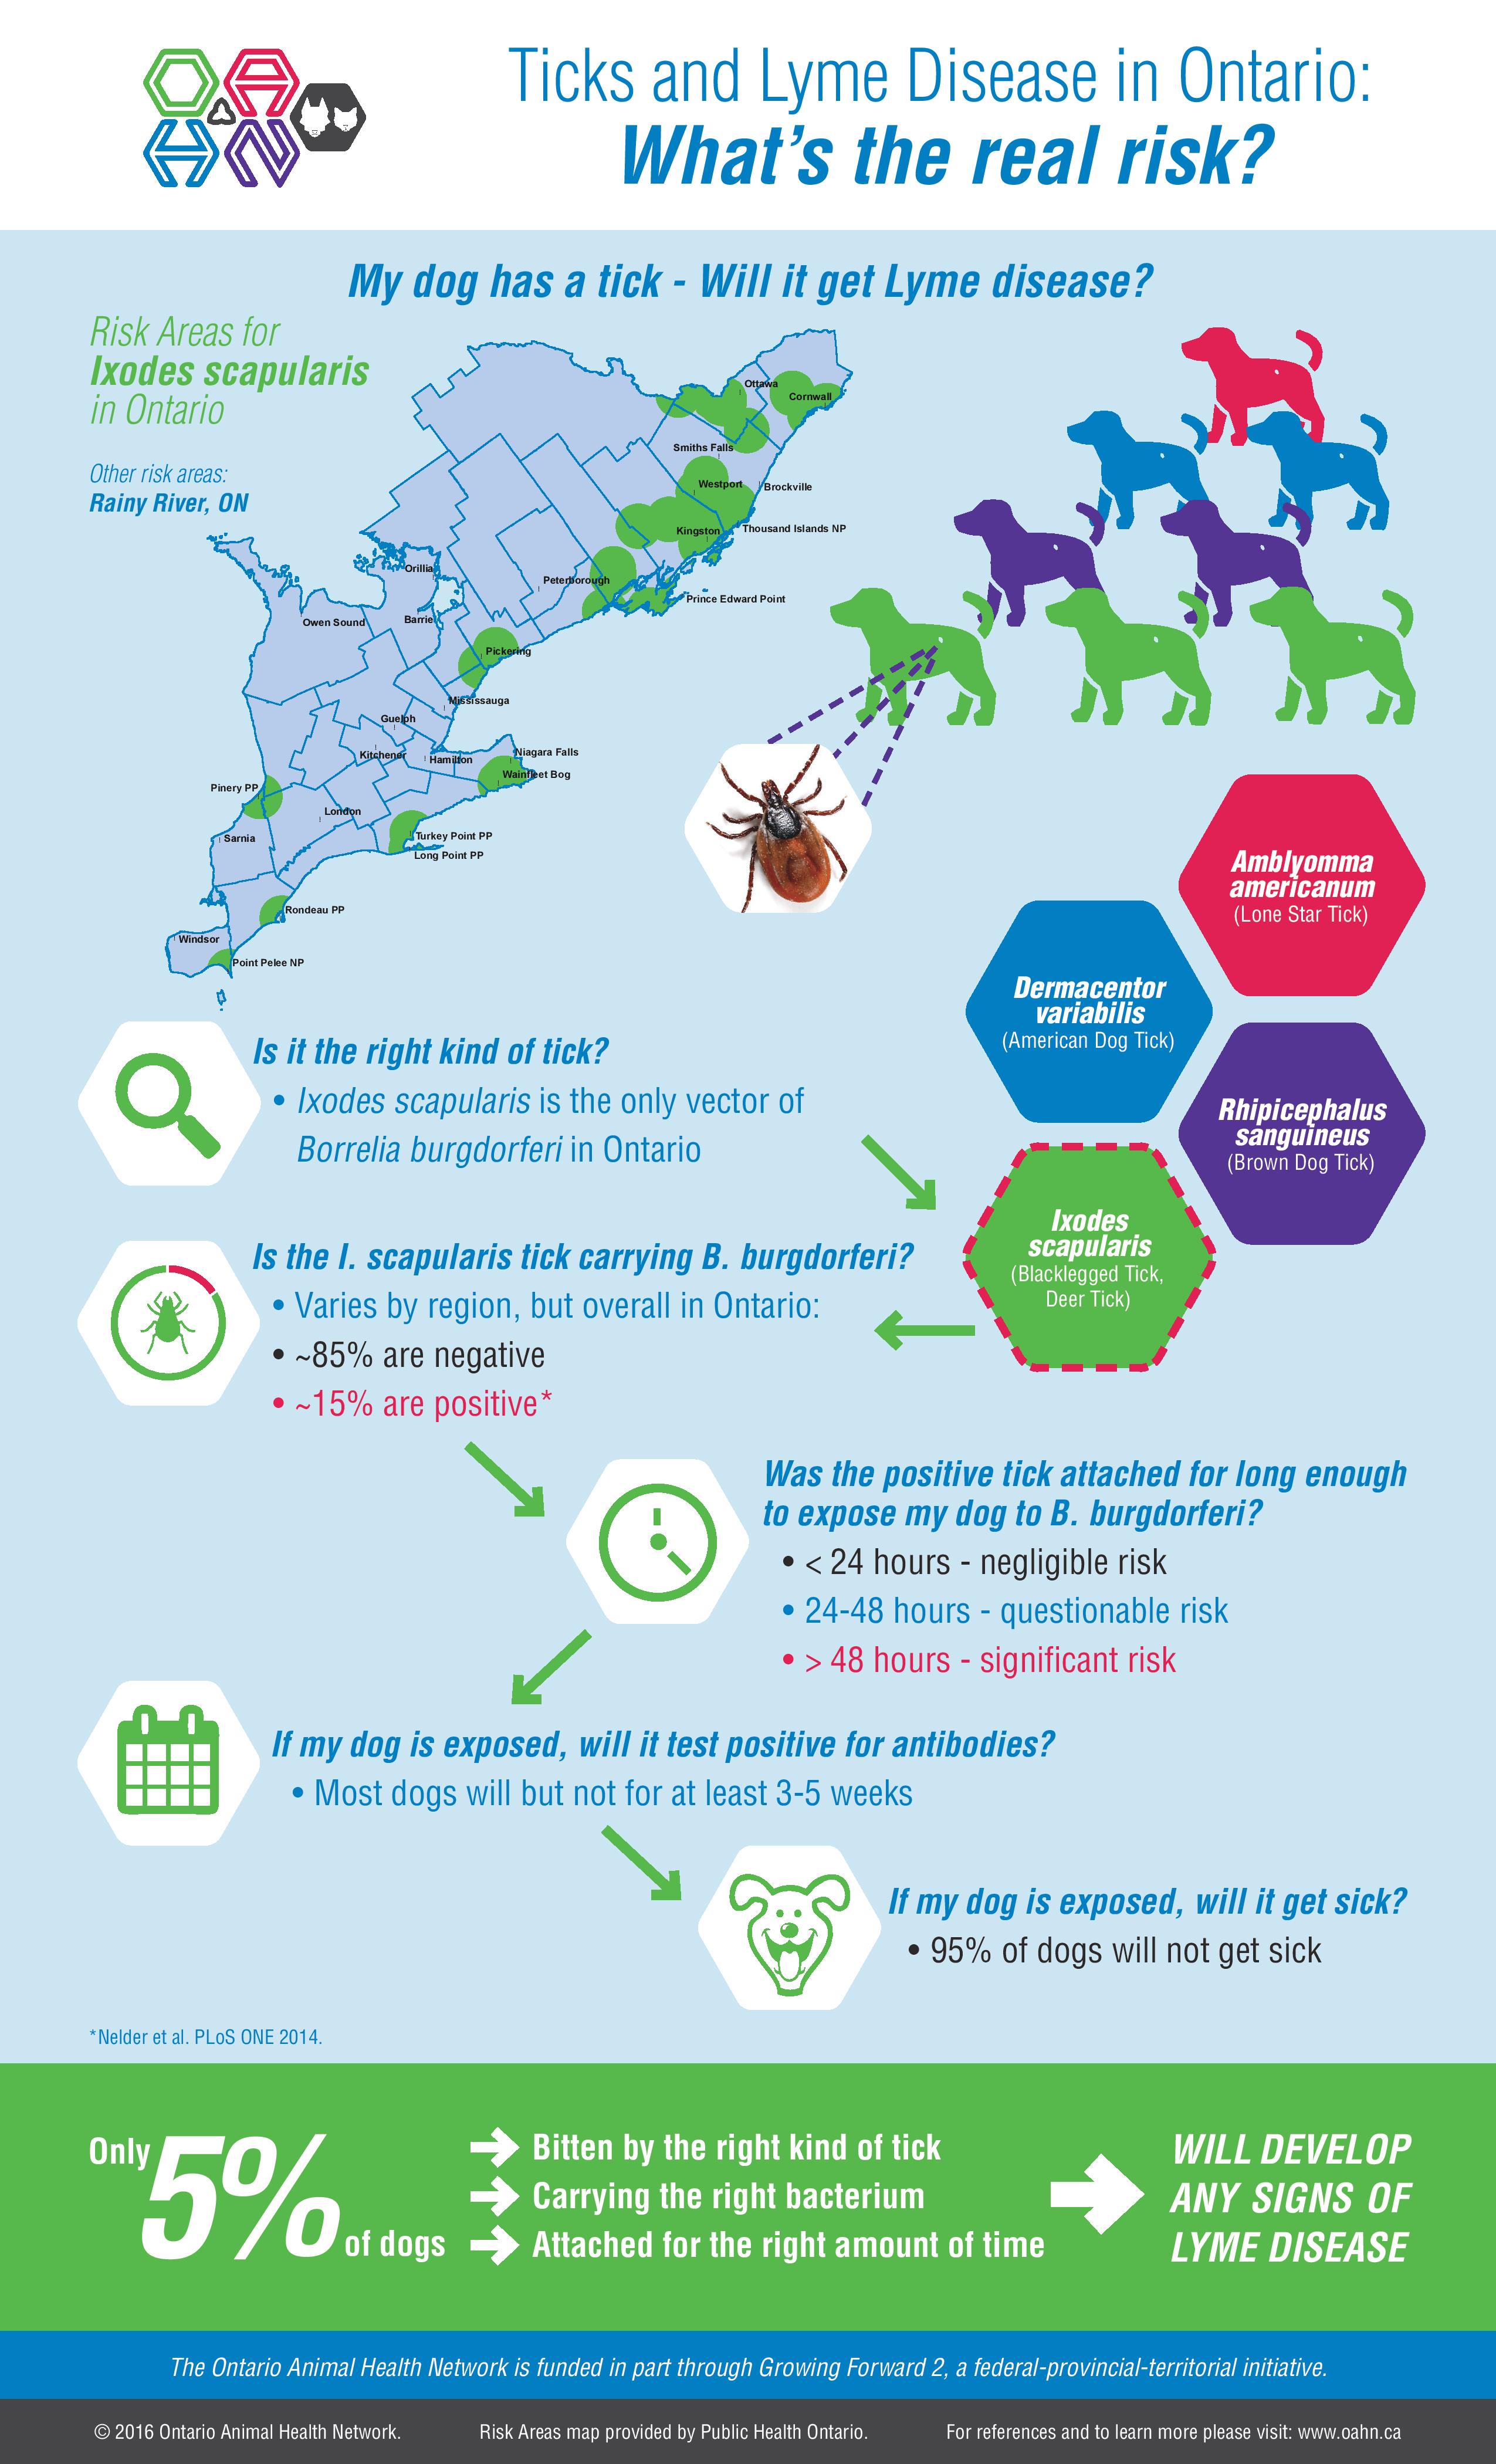 Ticks and Lyme Disease in Ontario: What’s the real risk? – Infographic